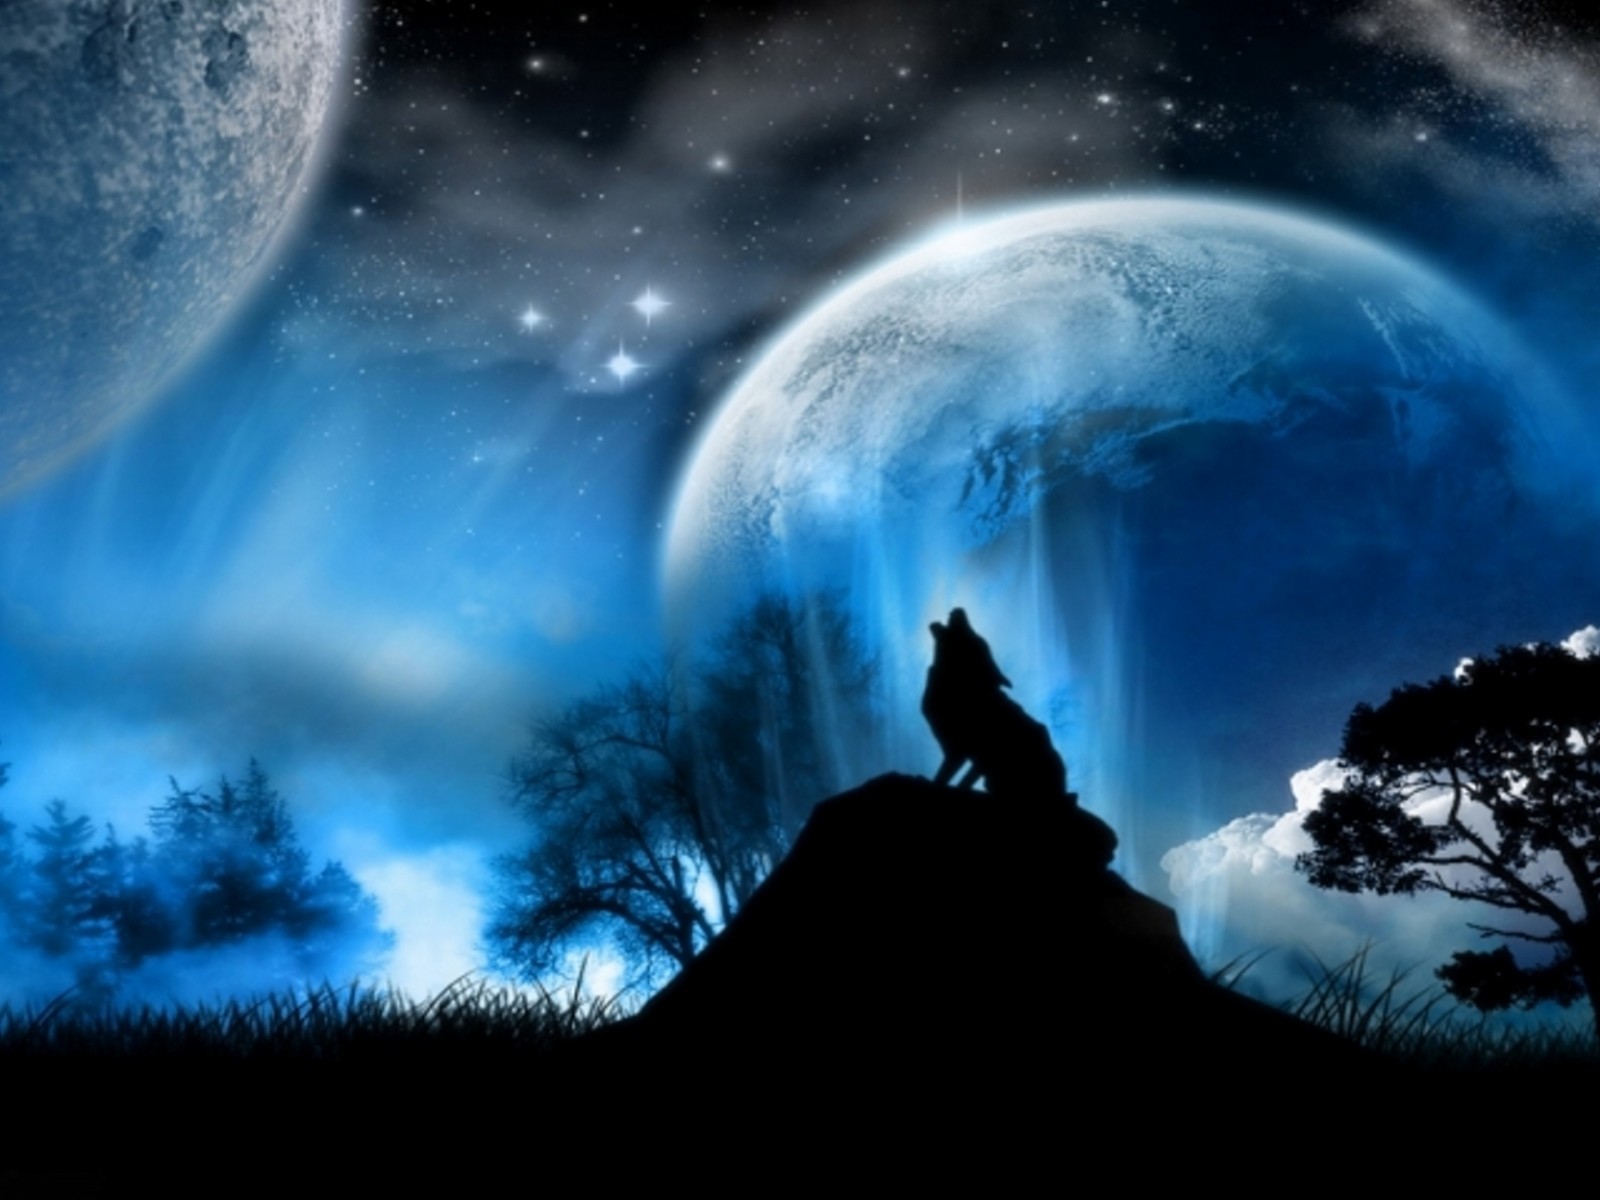 rate select rating give wolf howling at moon 1 5 give wolf